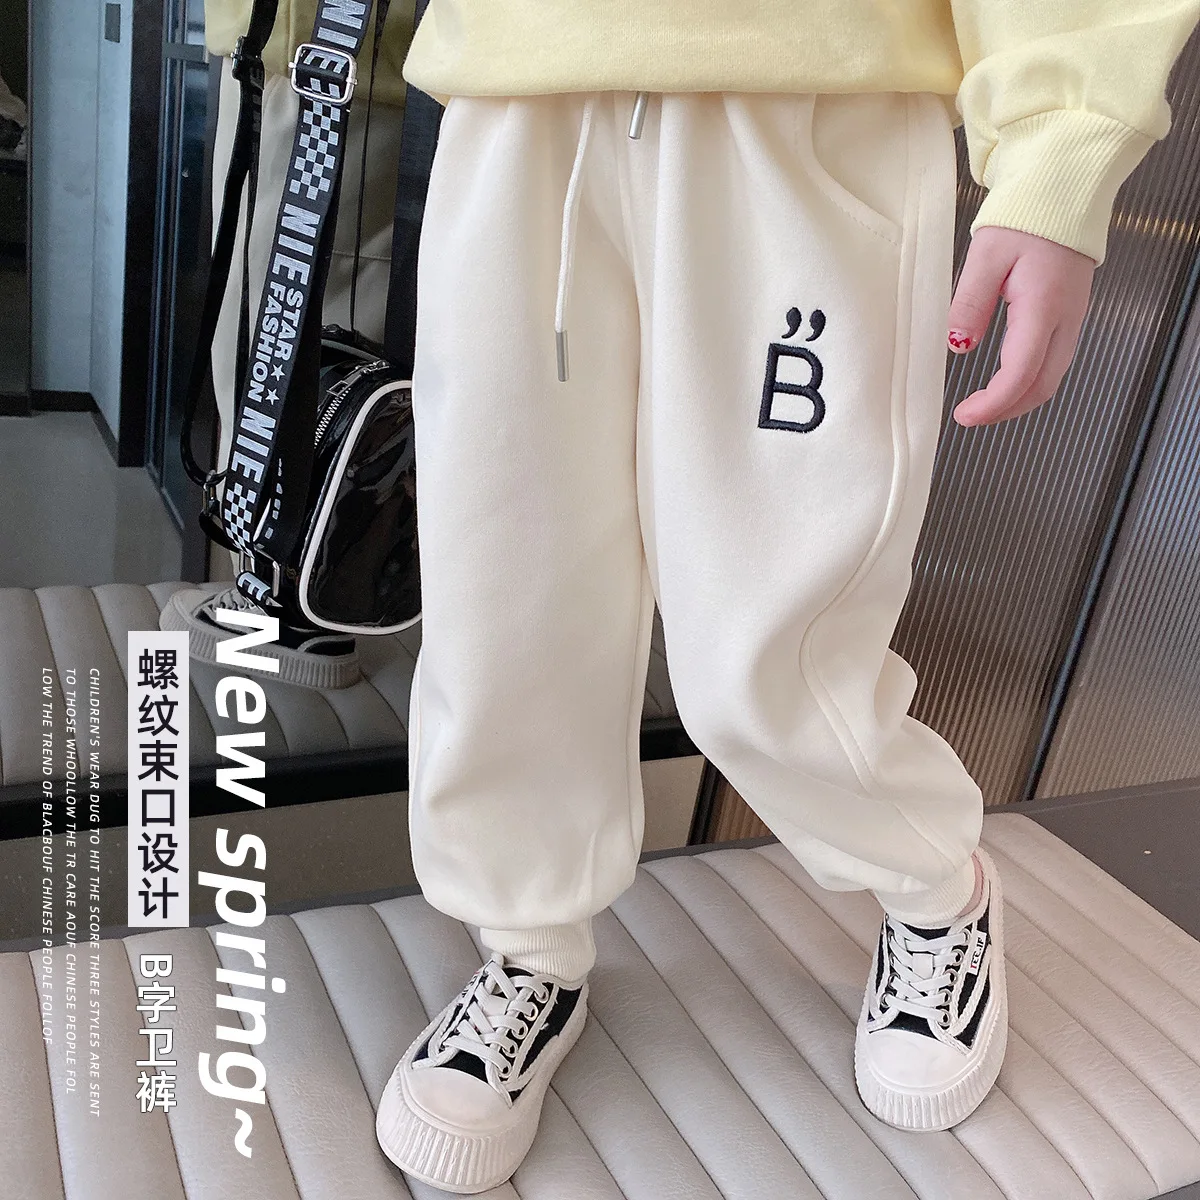 

New 2023 Pants for Kids Autumn Trousers Enfant Garcon Kids Fashion Loose Numble Gray Green Baby Girls Overalls Pants 18M-7T